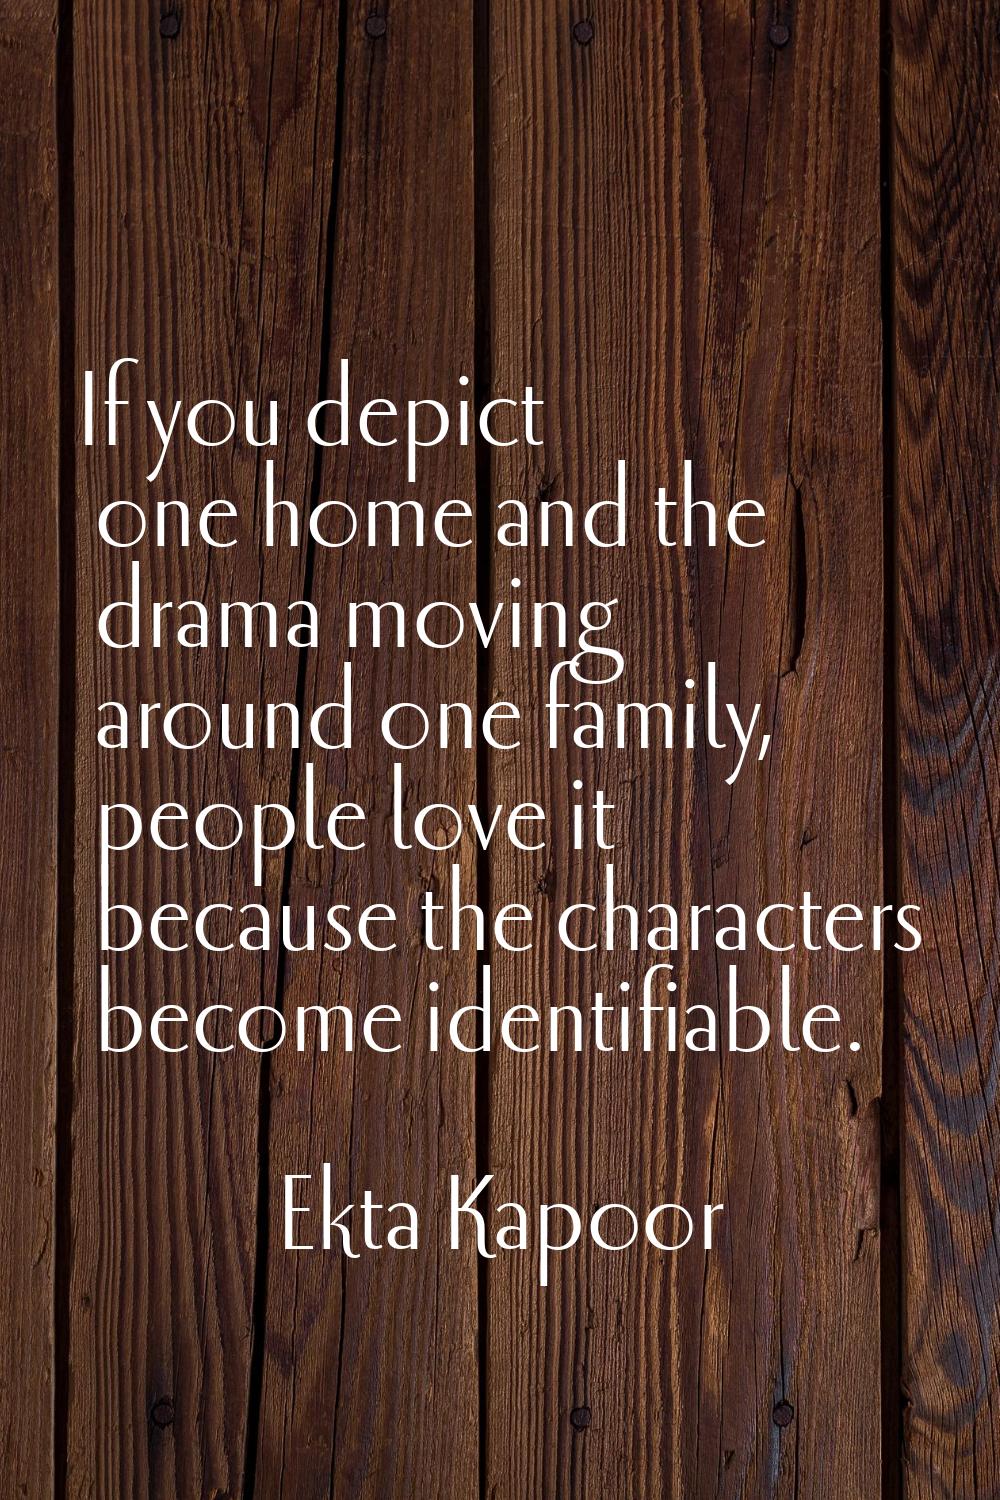 If you depict one home and the drama moving around one family, people love it because the character